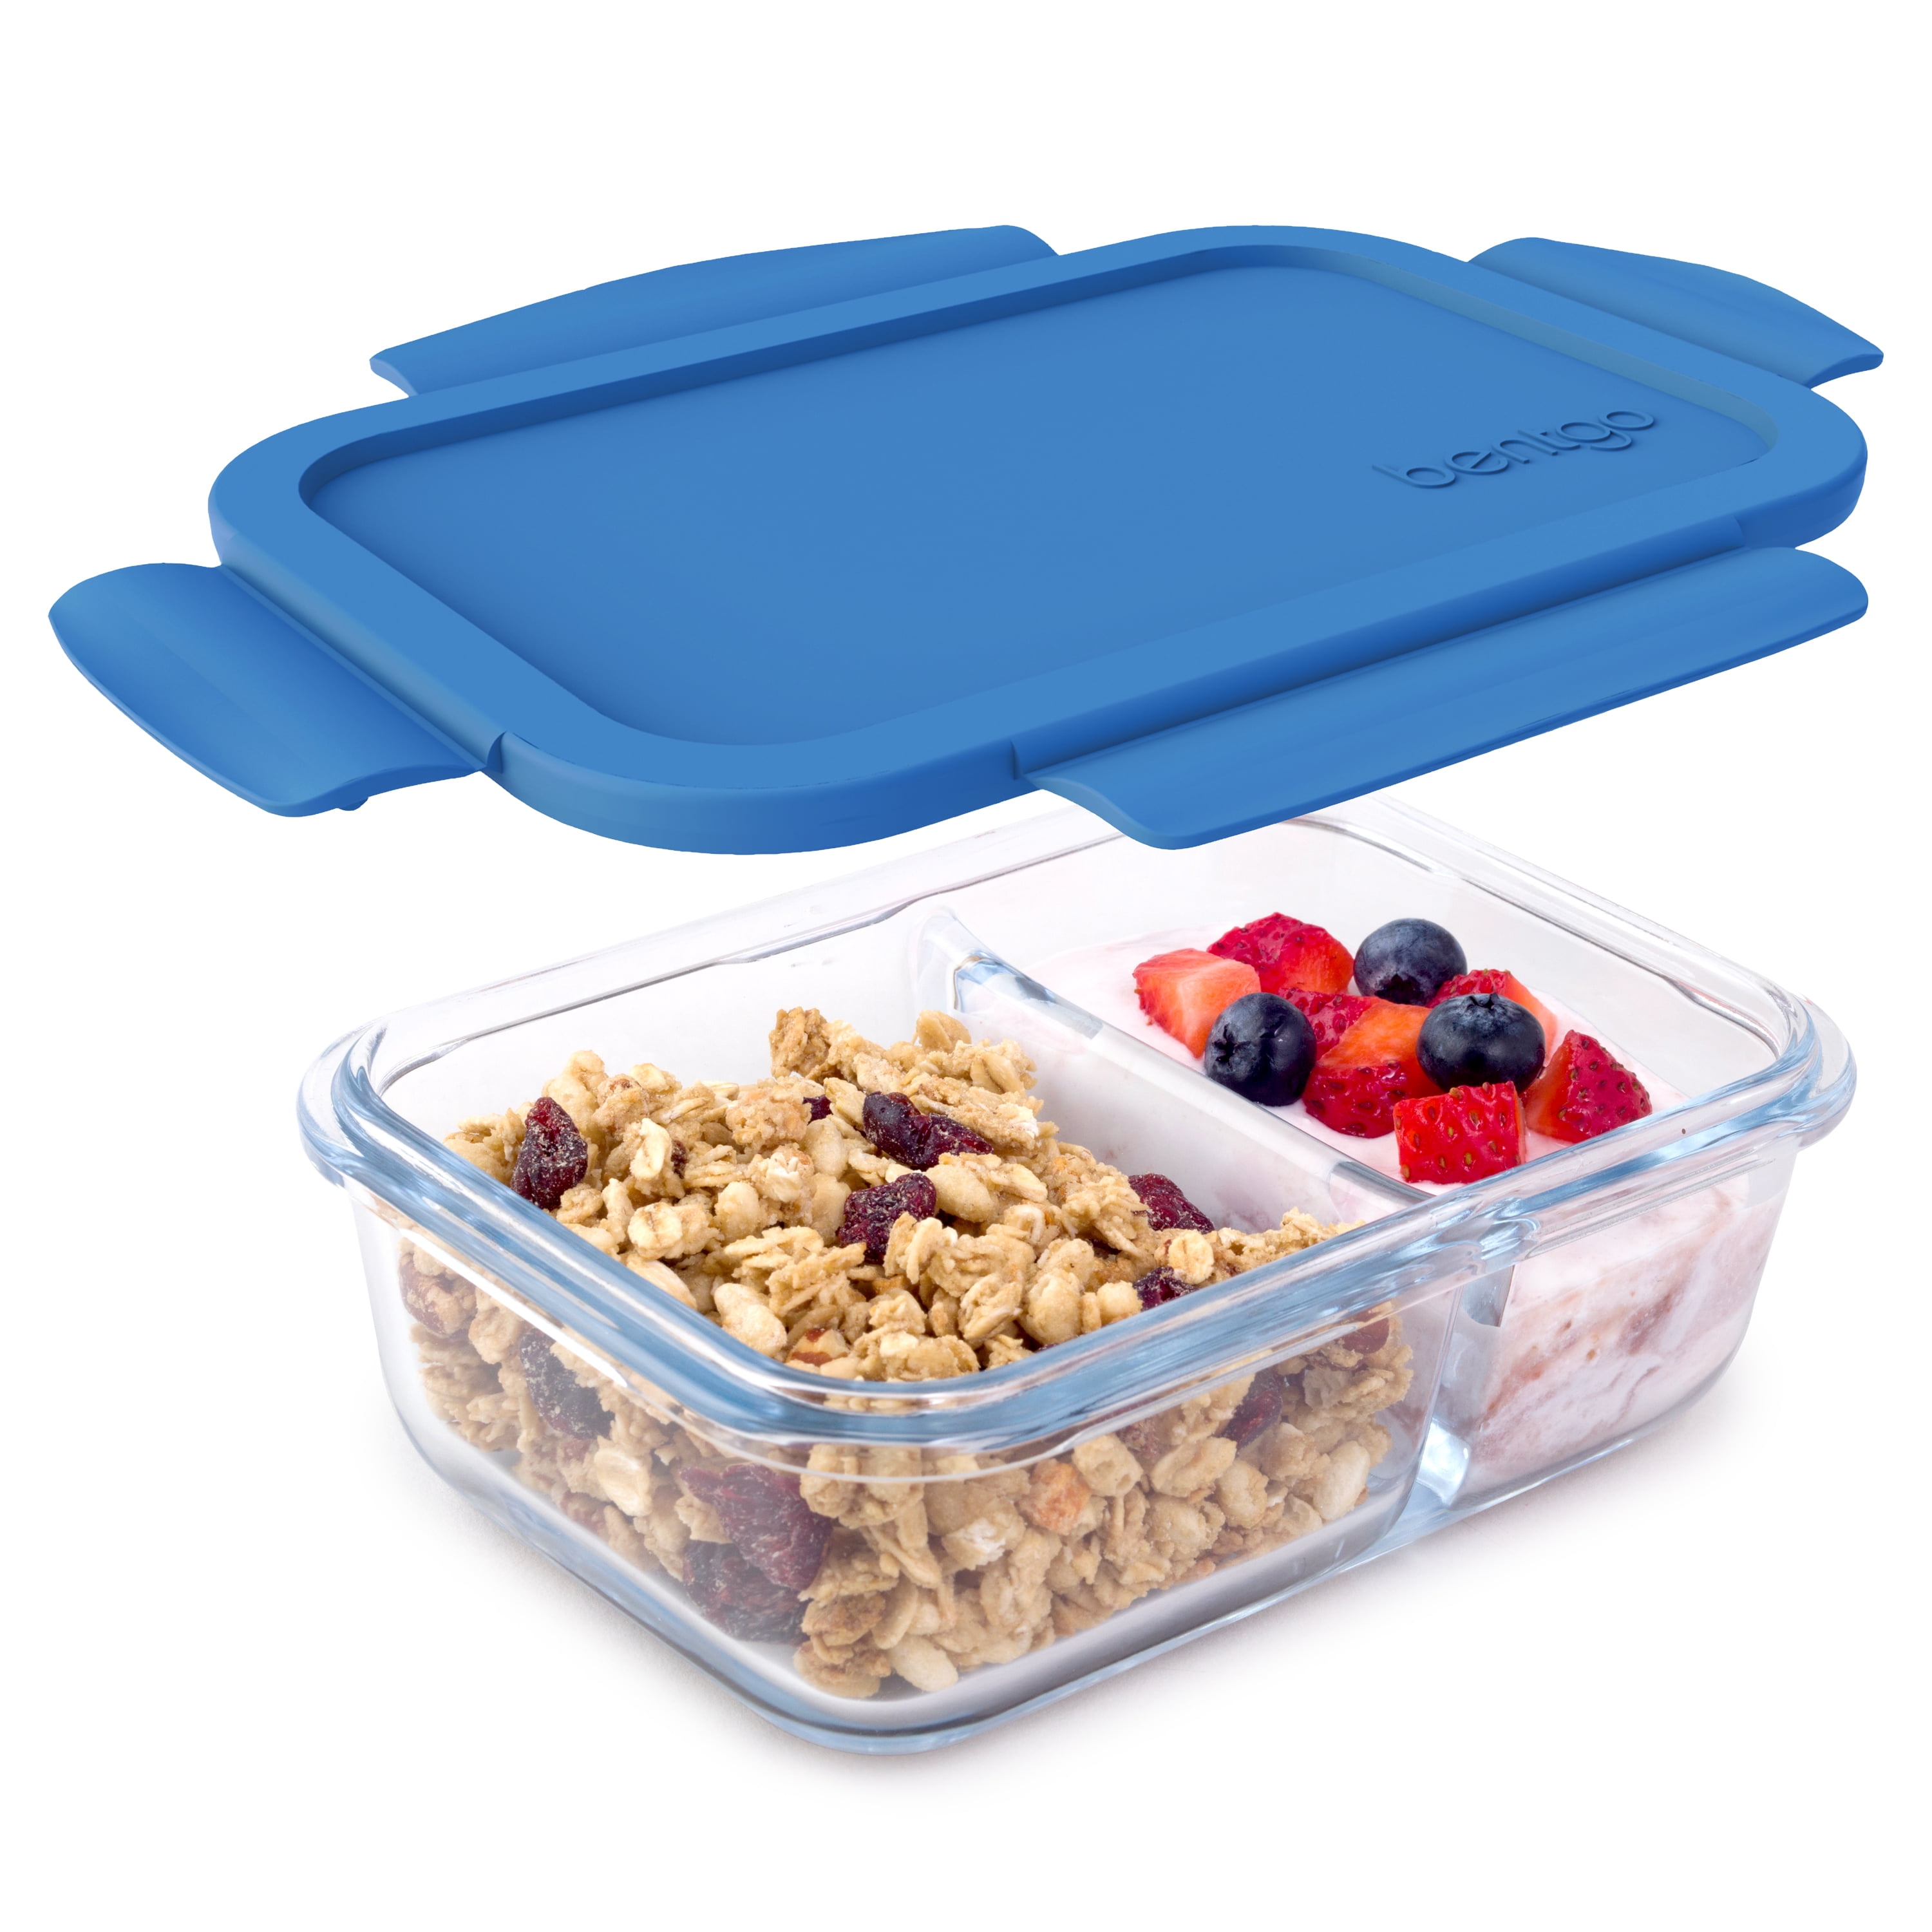 1 & 2 & 3 Compartment Glass Meal Prep Food Storage Containers with Lids, BENTO BOXES, PORTION CONTROL CONTAINERS, LUNCH CONTAINER